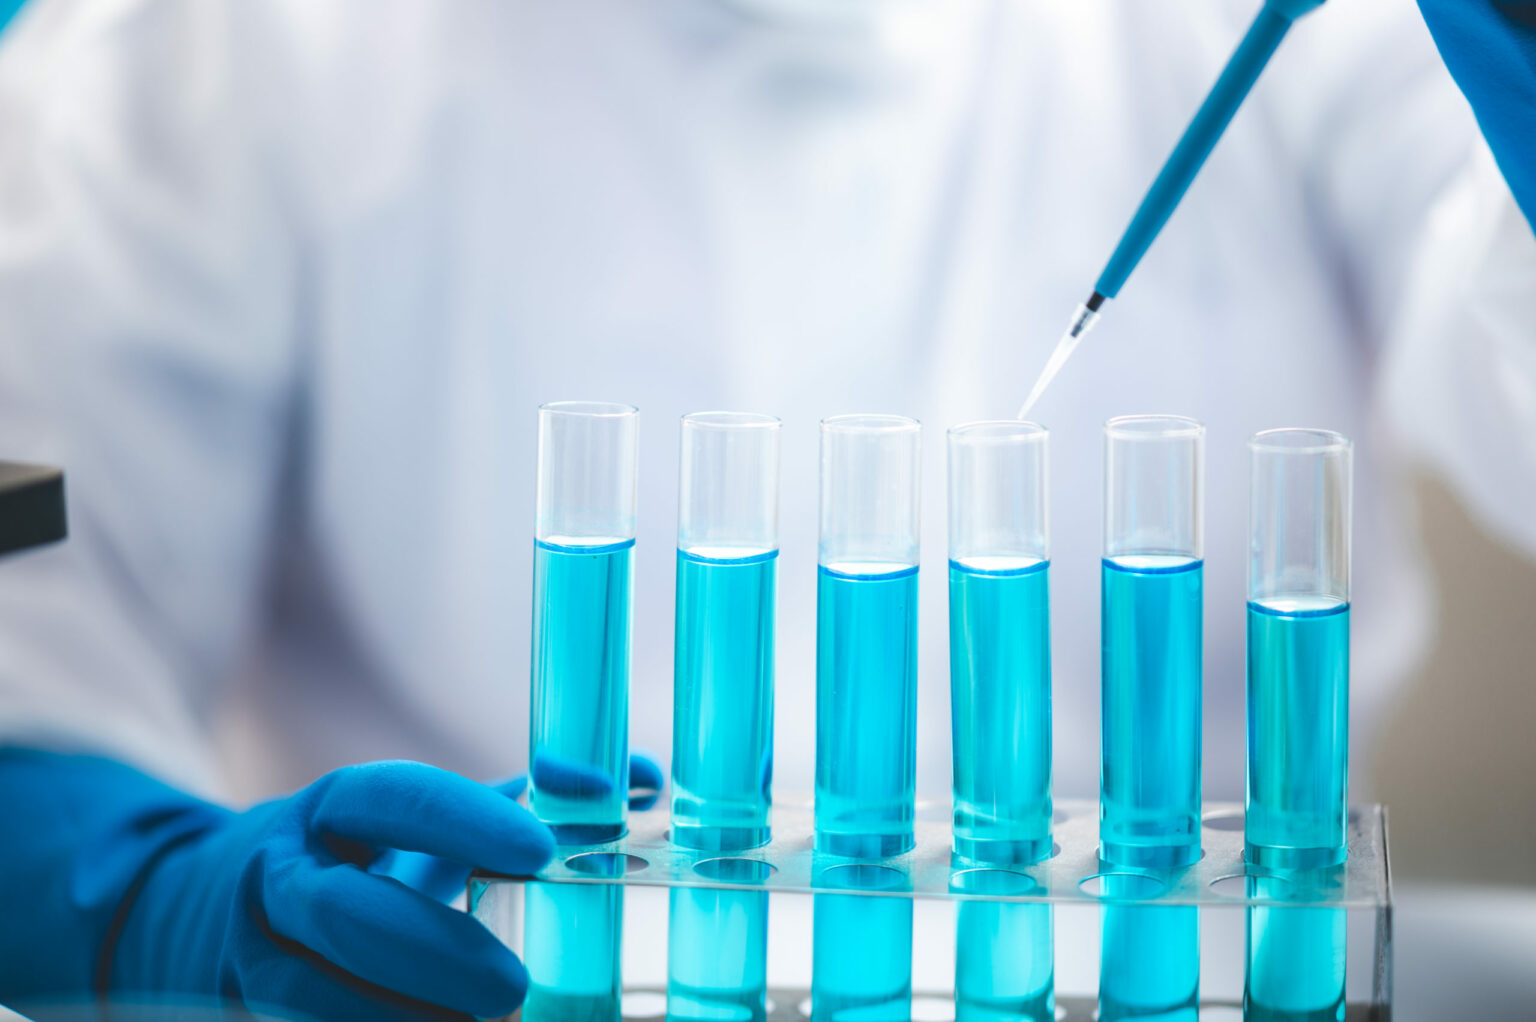 Researchers,Scientist,Working,Analysis,With,Blue,Liquid,Test,Tube,In